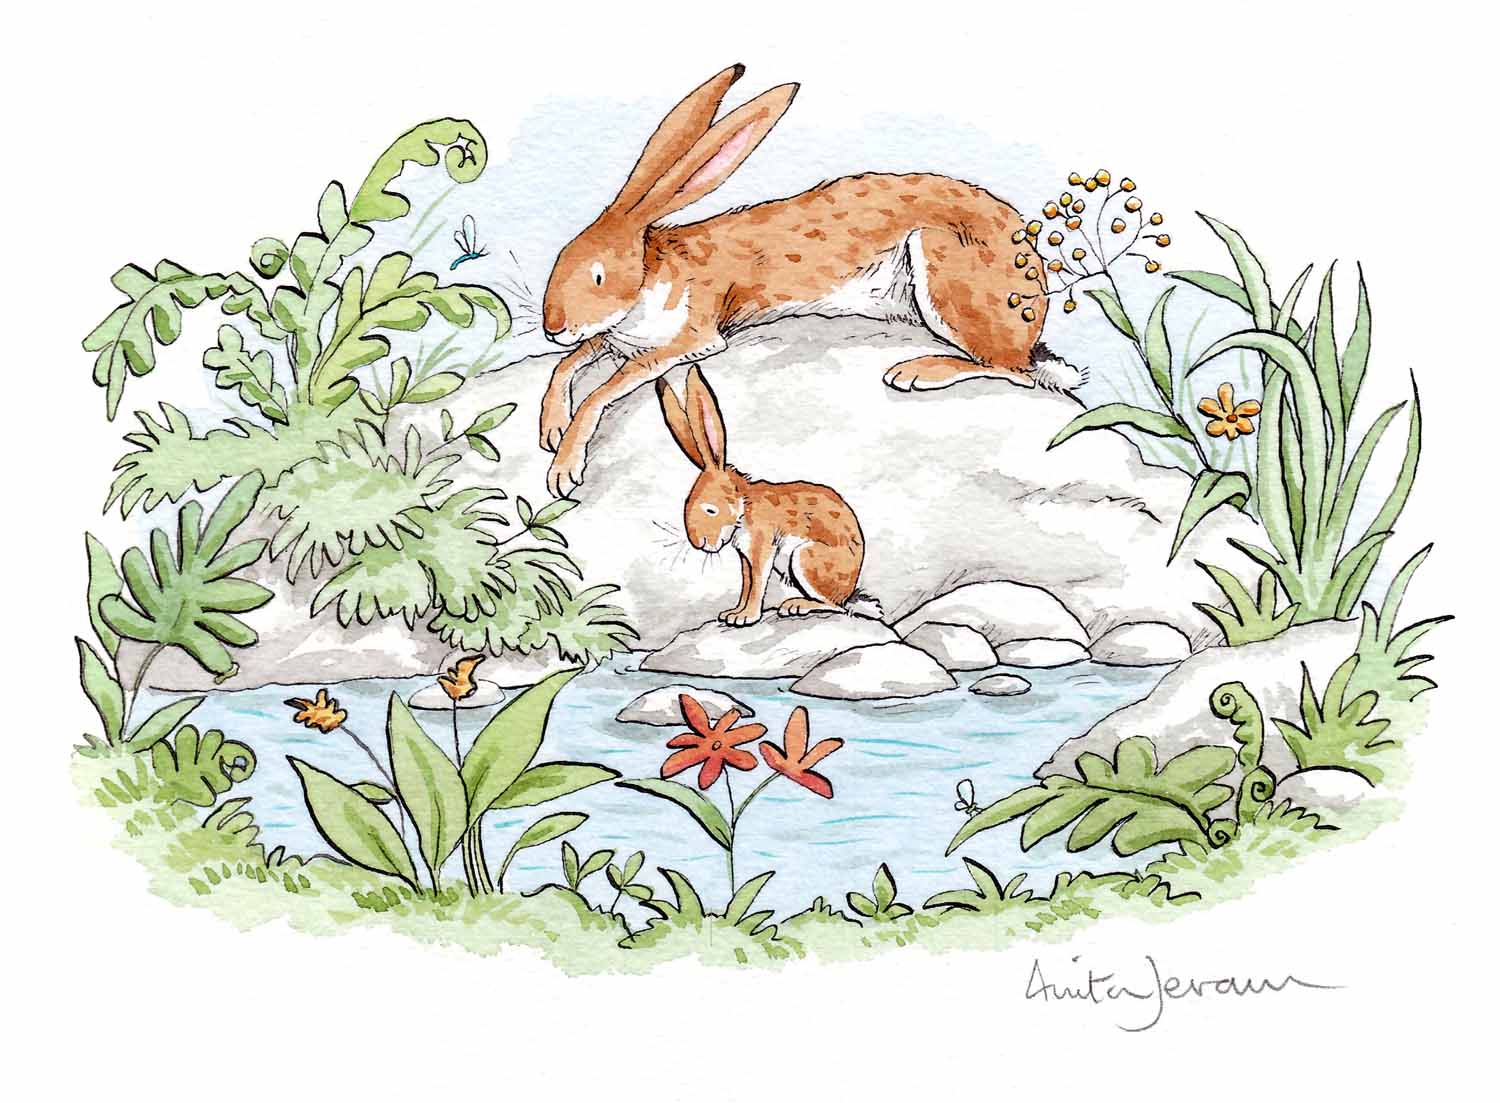 Jeram has also been flexing her talents in new and exciting ways and we are proud to be able to showcase a number of rabbit hare and bunny explorations